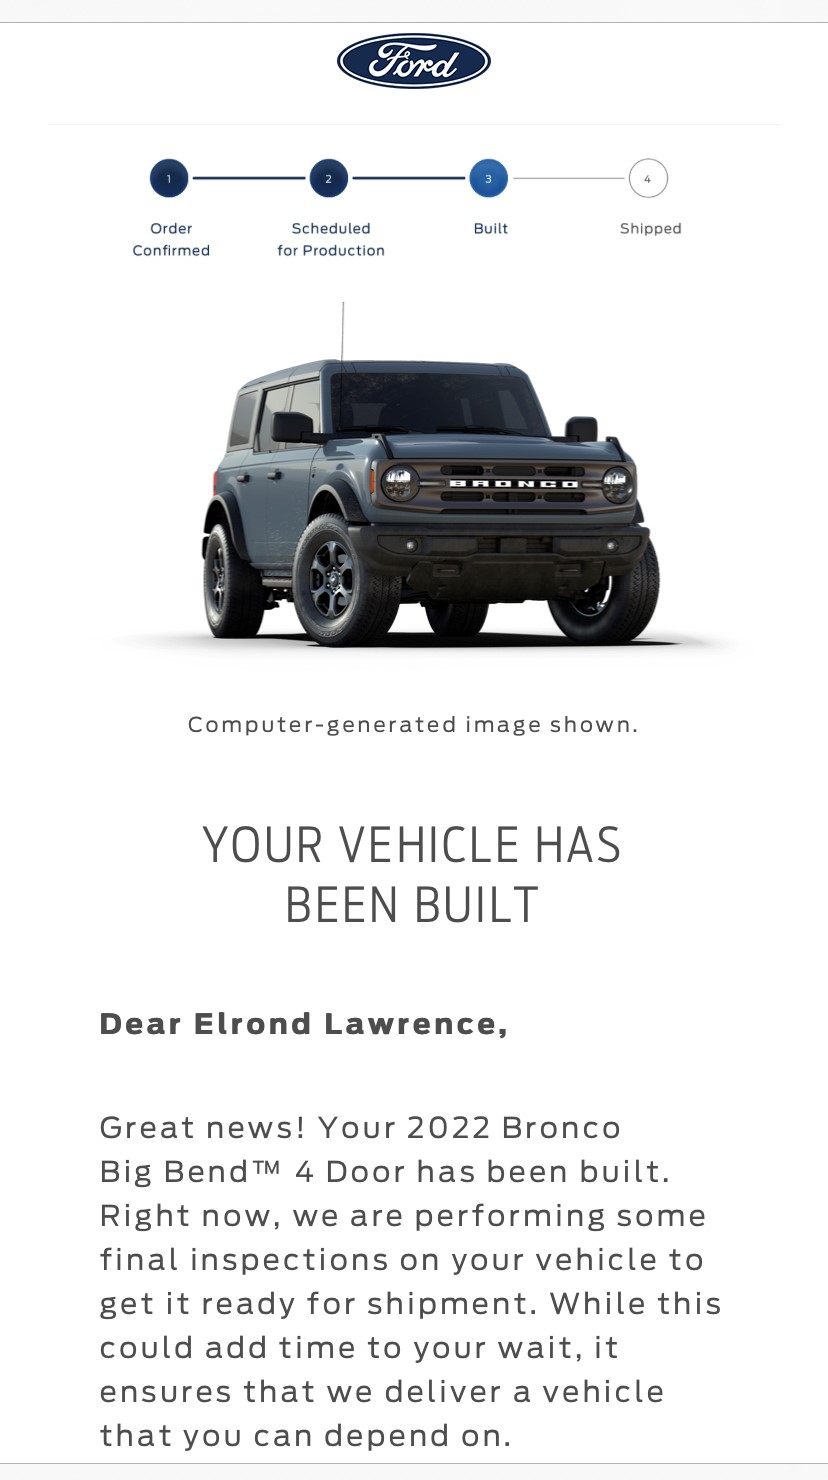 Ford Bronco 53,000 Ford vehicles currently waiting for chips Bronco Email 1a - May11-22